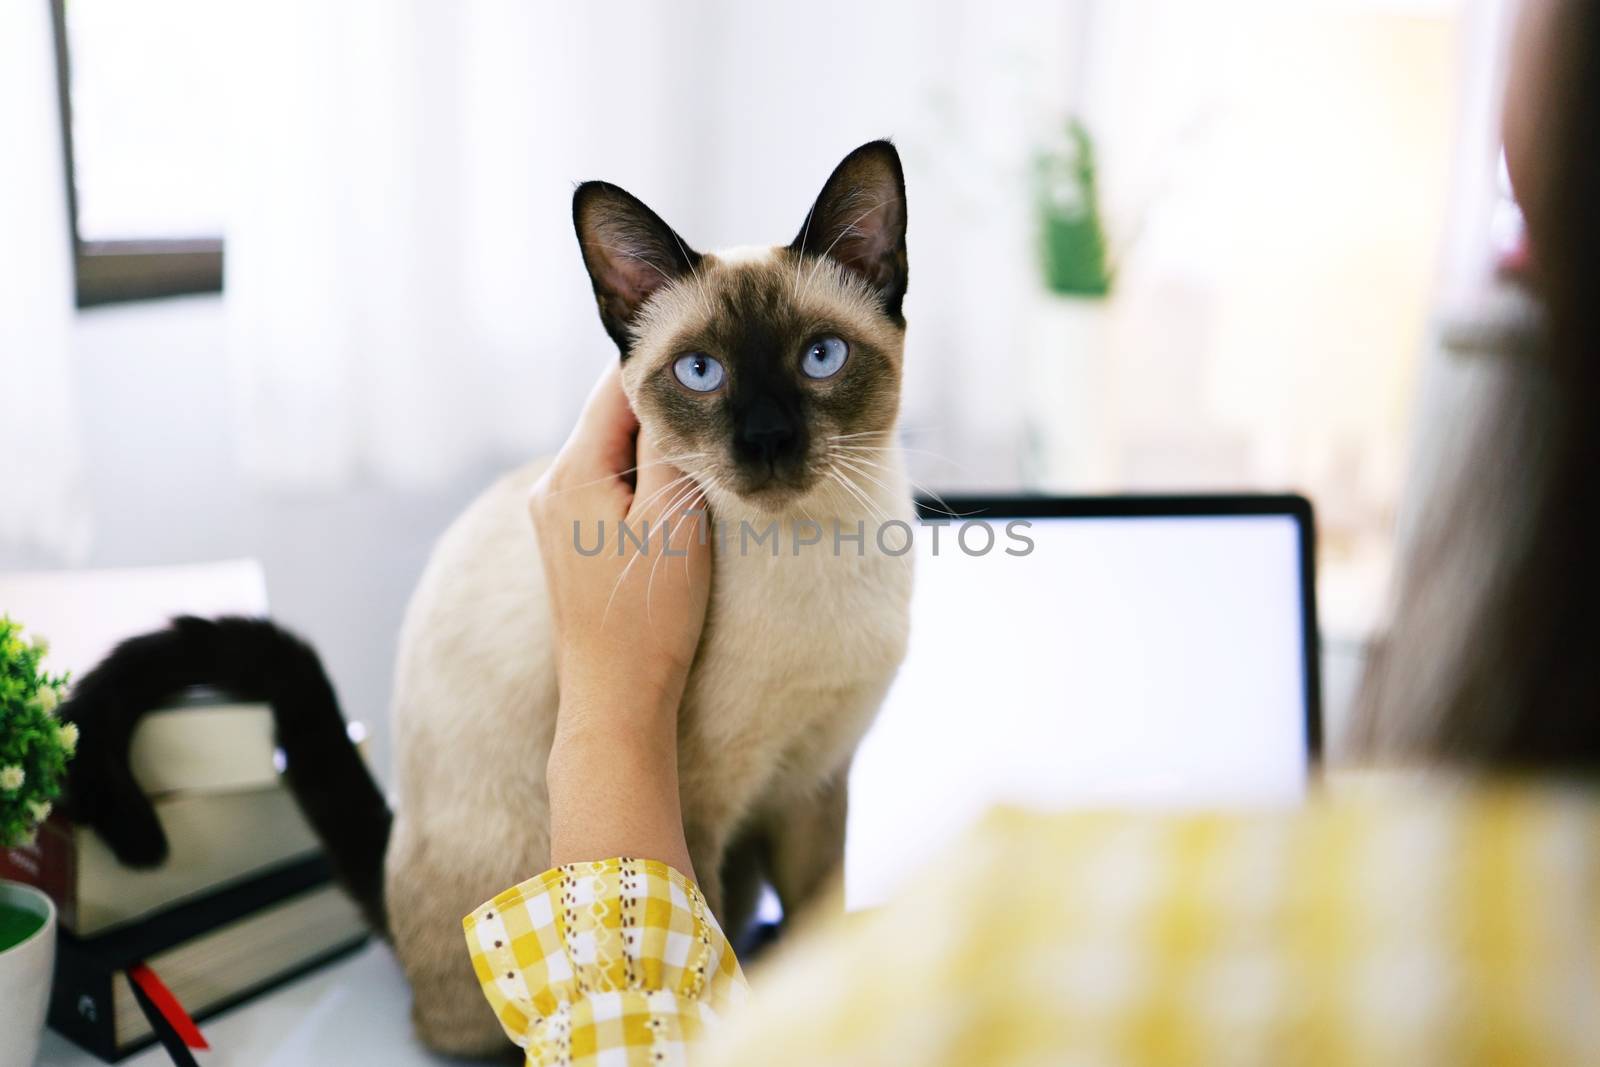 Coronavirus. Business woman working from home with cat Concept home quarantine, COVID-19, Coronavirus outbreak situation